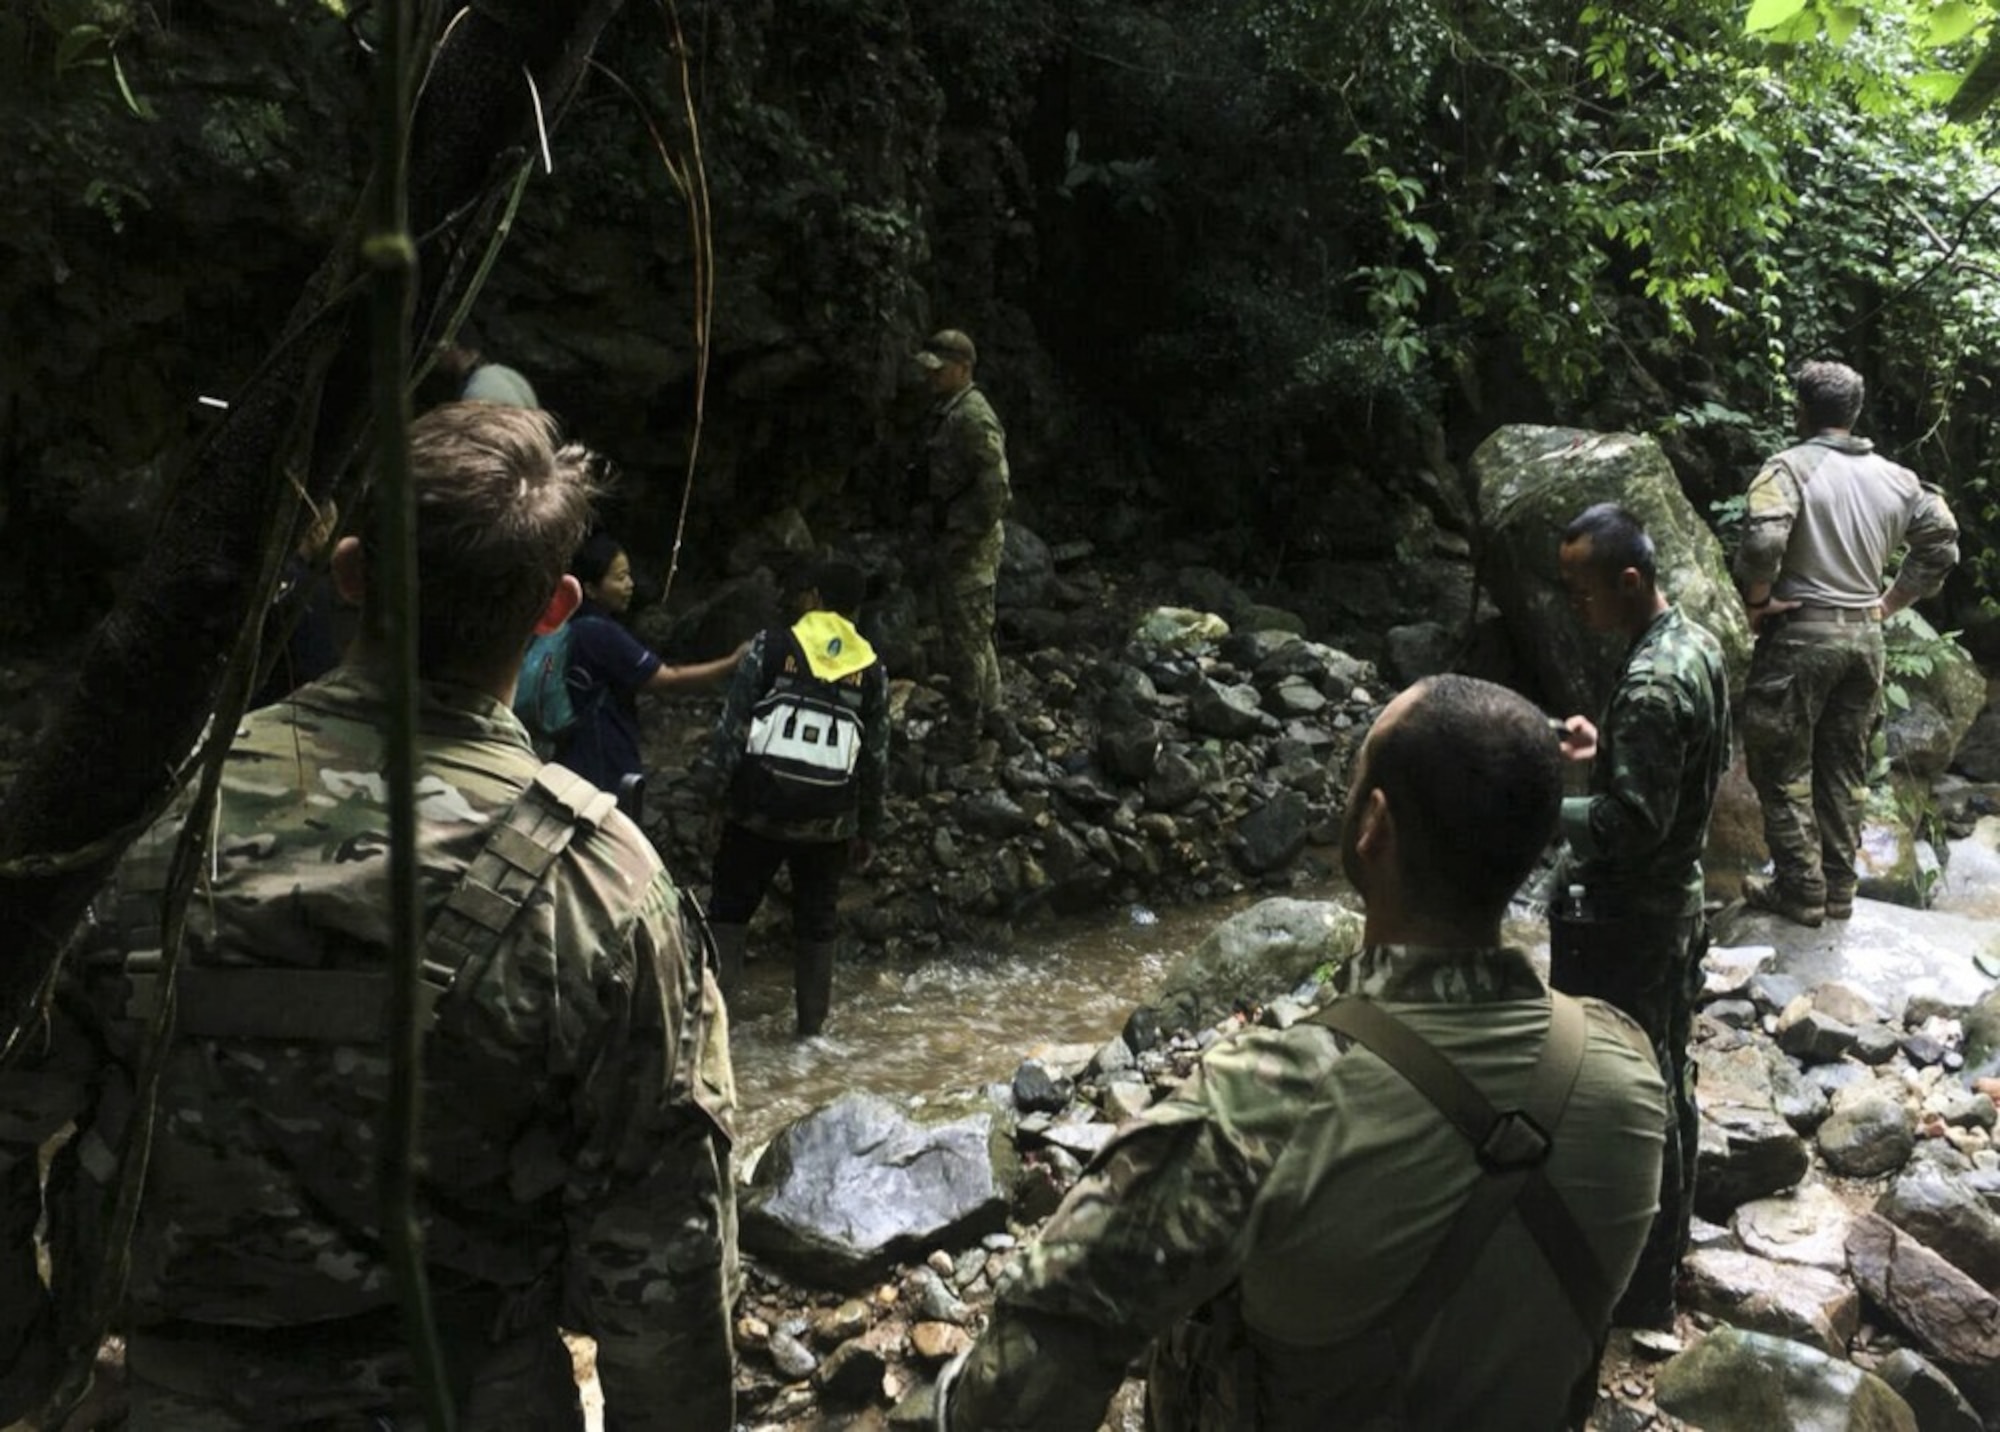 Airmen from the U.S. Indo-Pacific Command (USINDOPACOM) conduct a combined land survey with Royal Thai Army partners June 29, 2018, at Chiang Rai, Thailand. The search and rescue team consists of pararescuemen and survival specialists trained in rescue techniques and procedures, as well as their support personnel. (Courtesy photo)